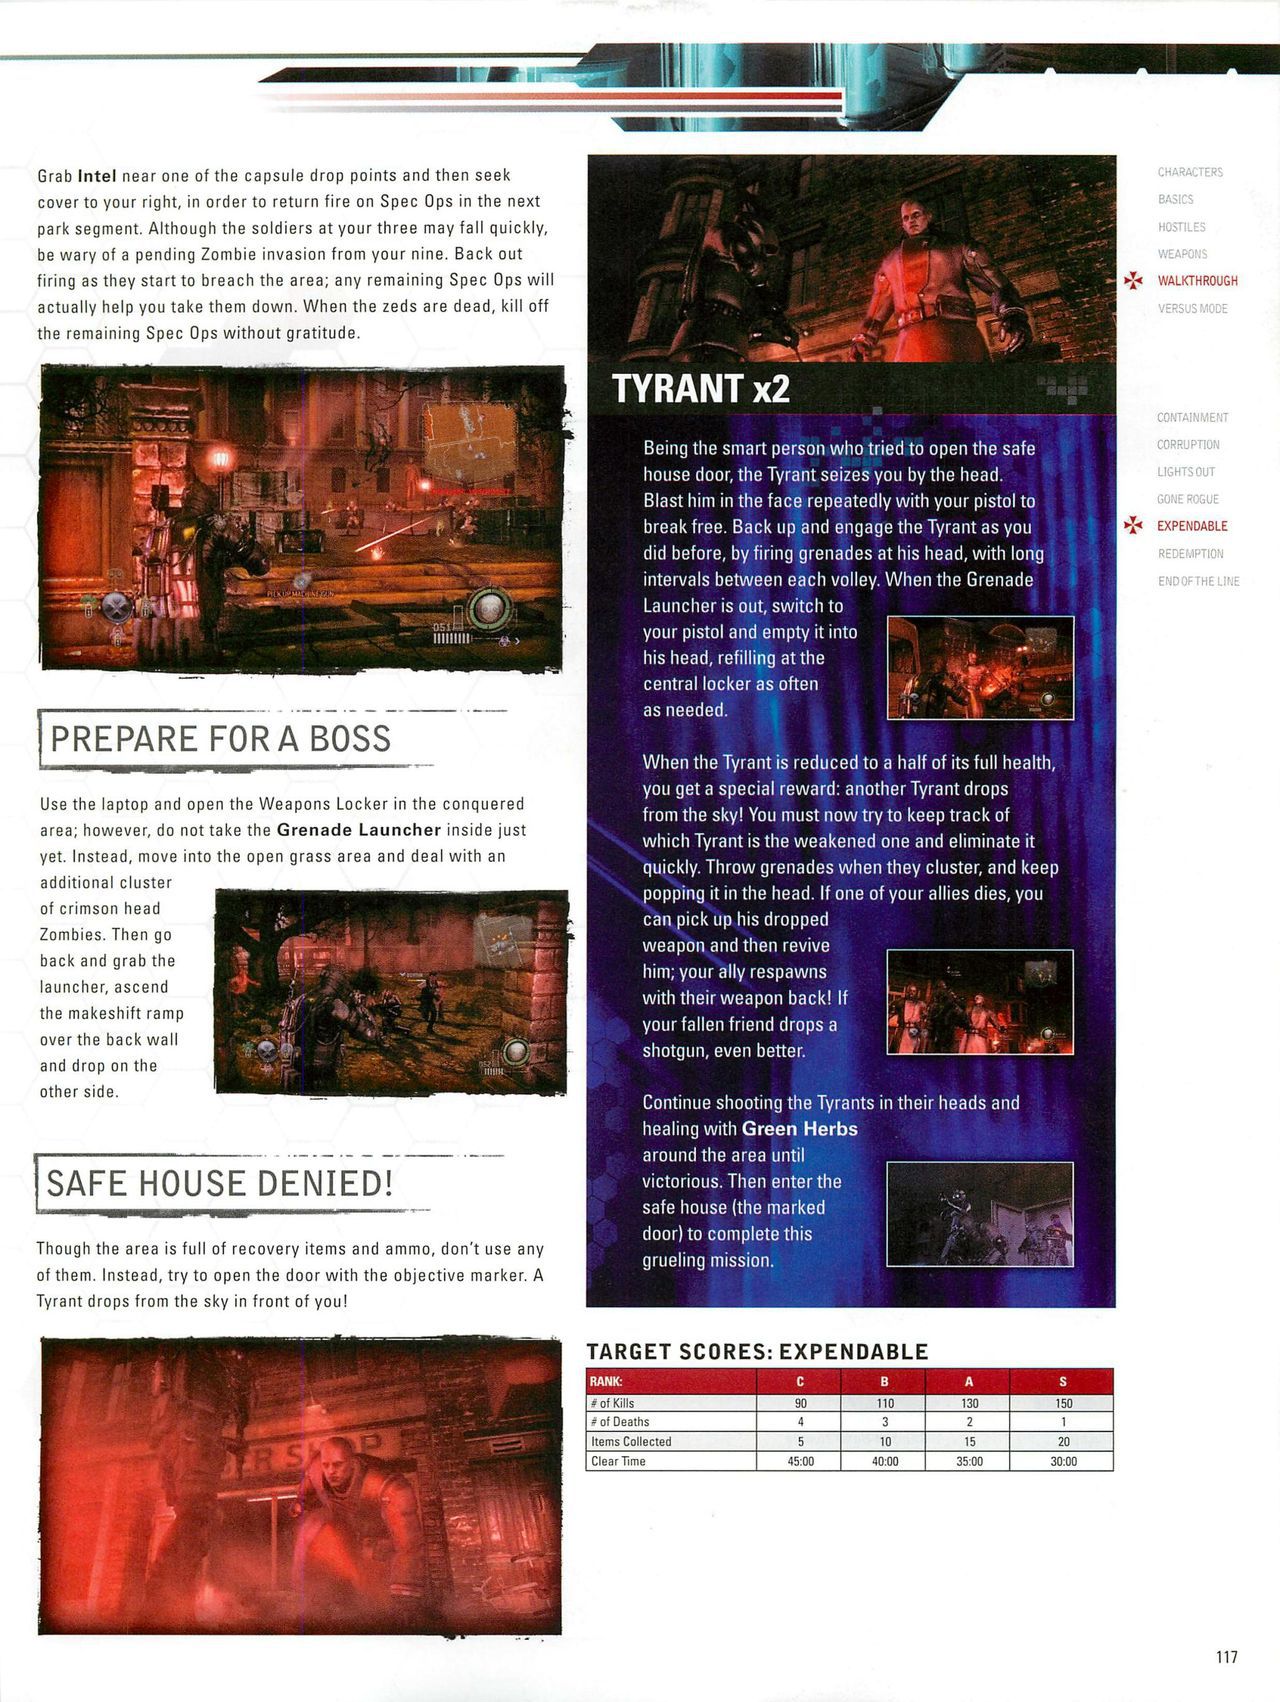 Resident Evil: Operation Raccoon City Official Strategy Guide (watermarked) 119